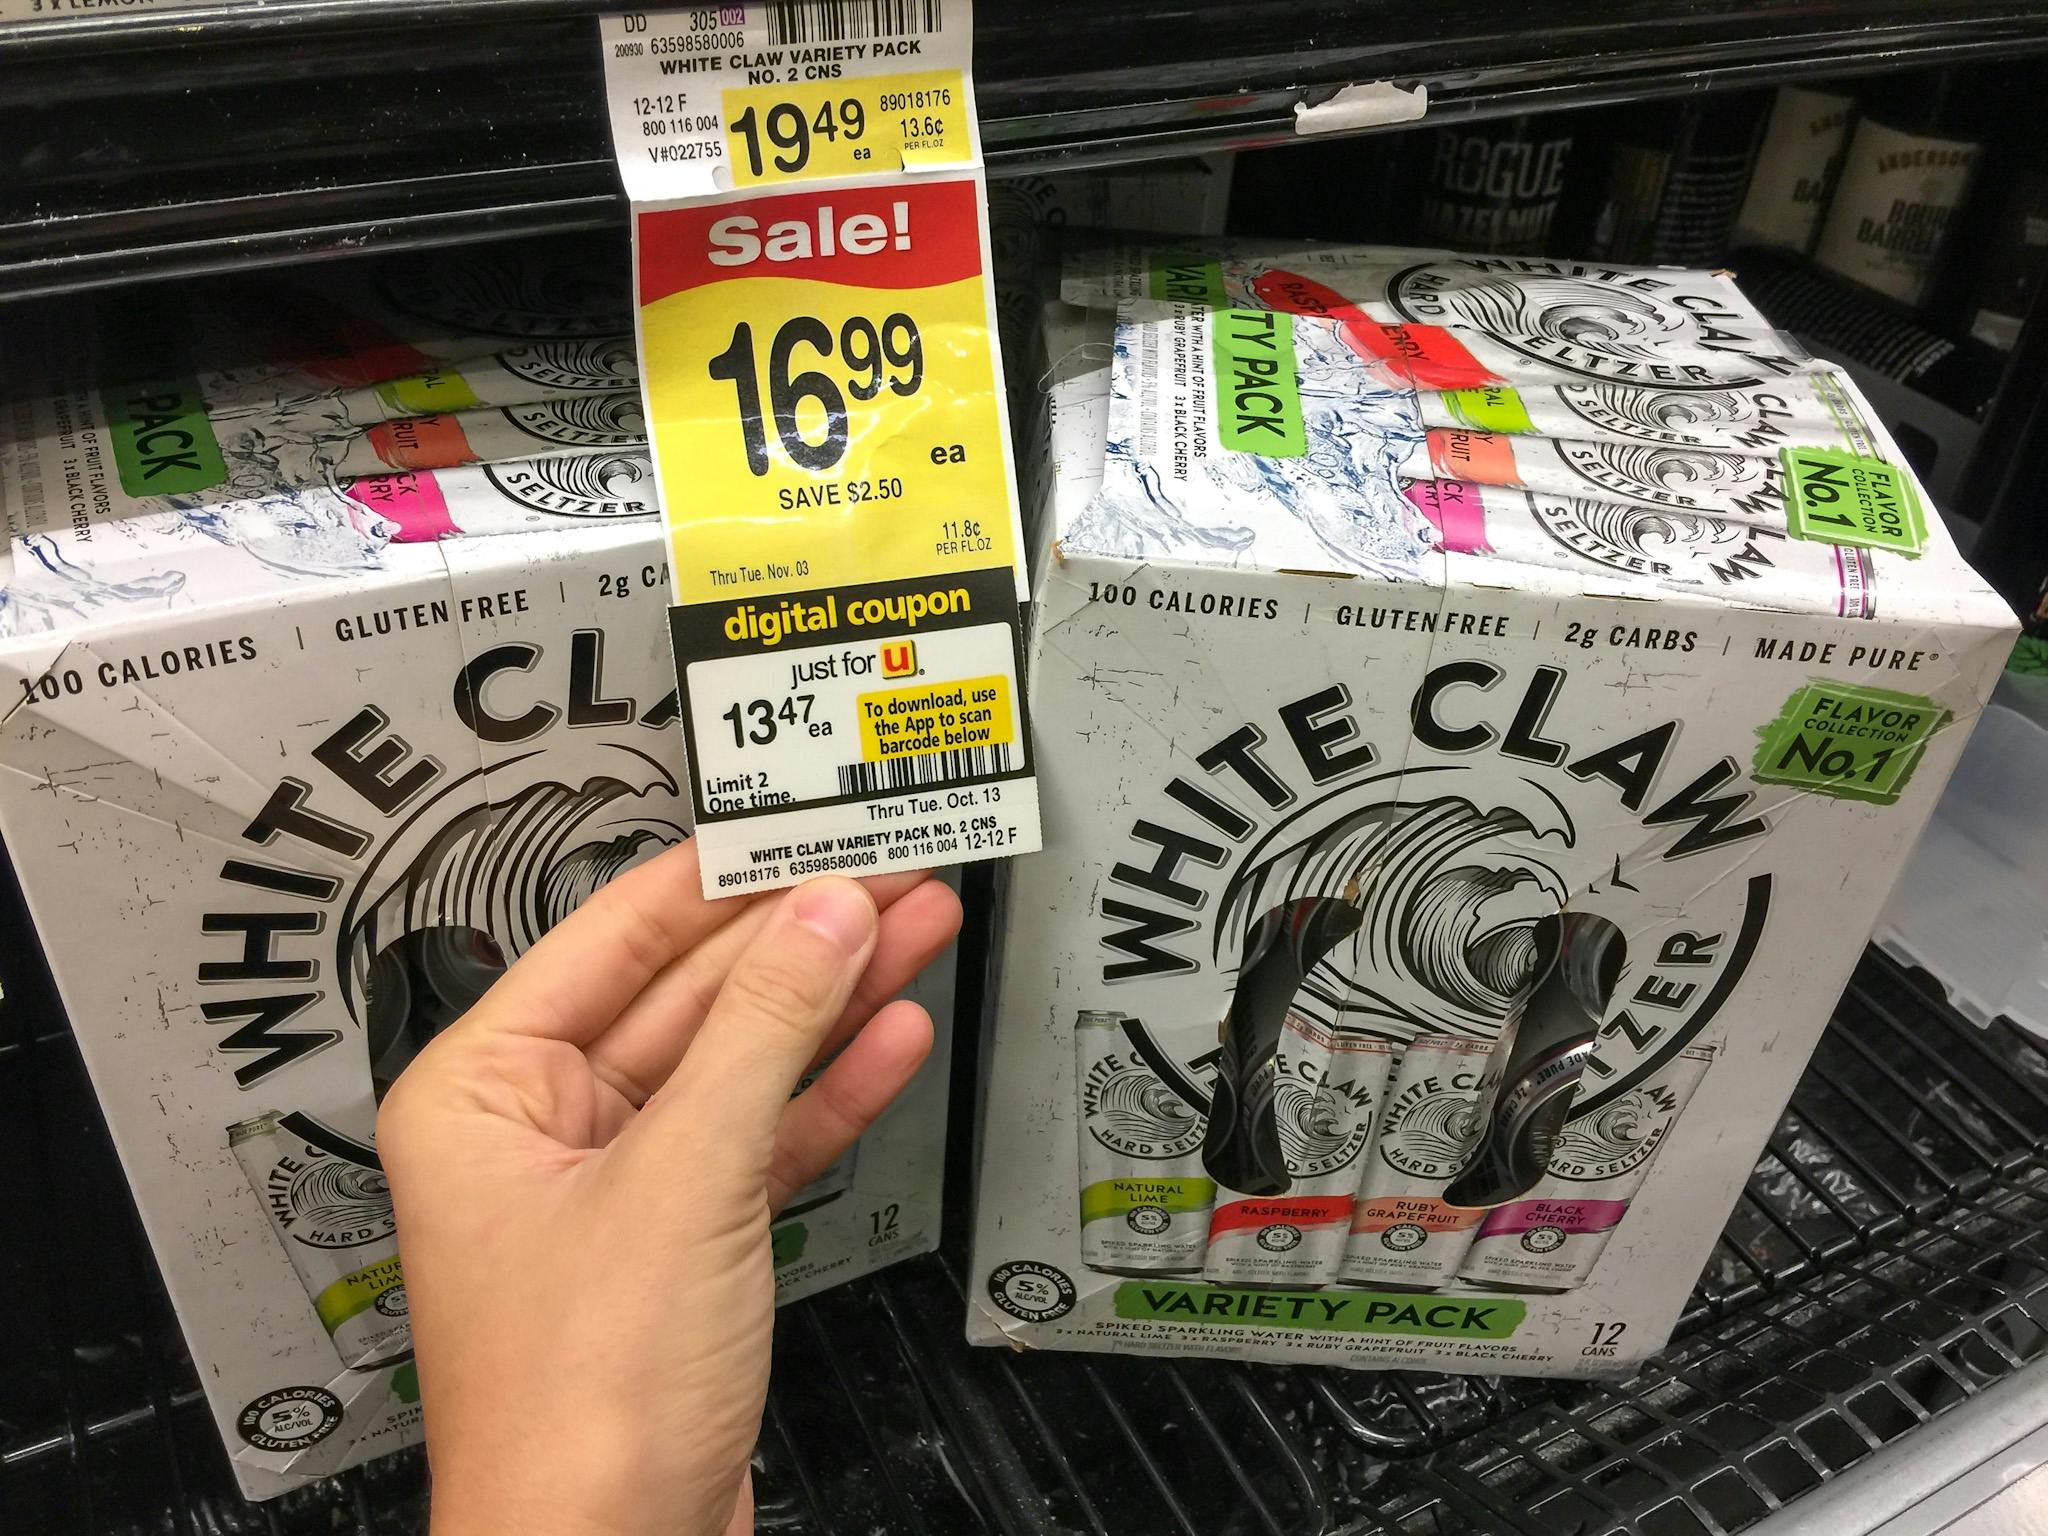 woman holding a price tag for White Claw